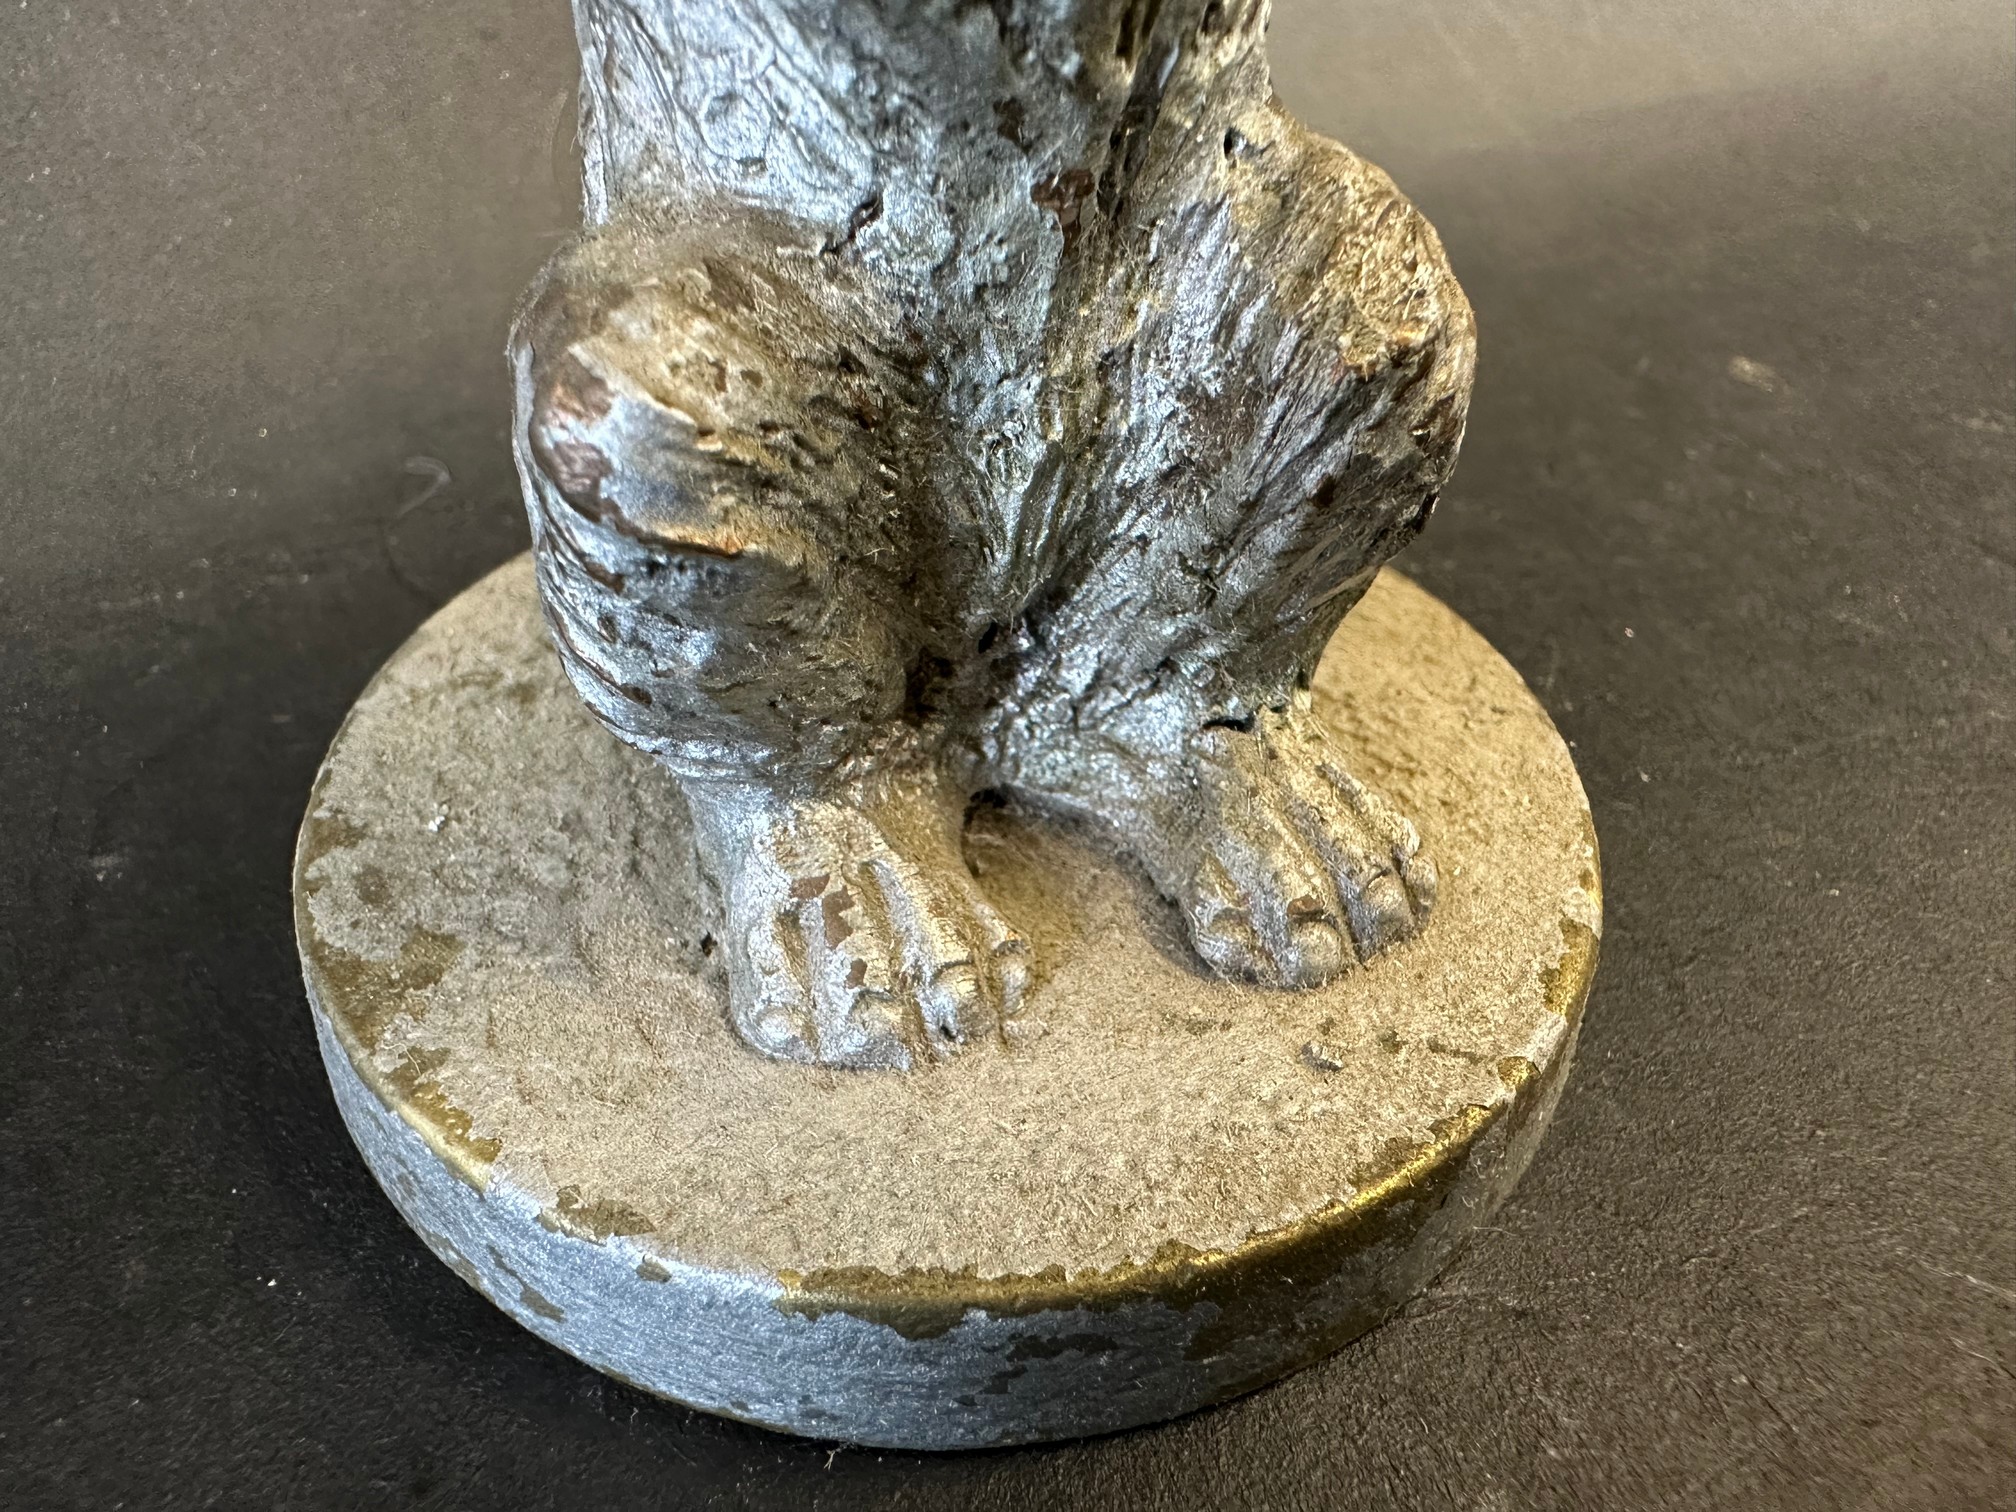 A car accessory mascot in the form of a dog begging, approx. 4" high. - Image 2 of 3